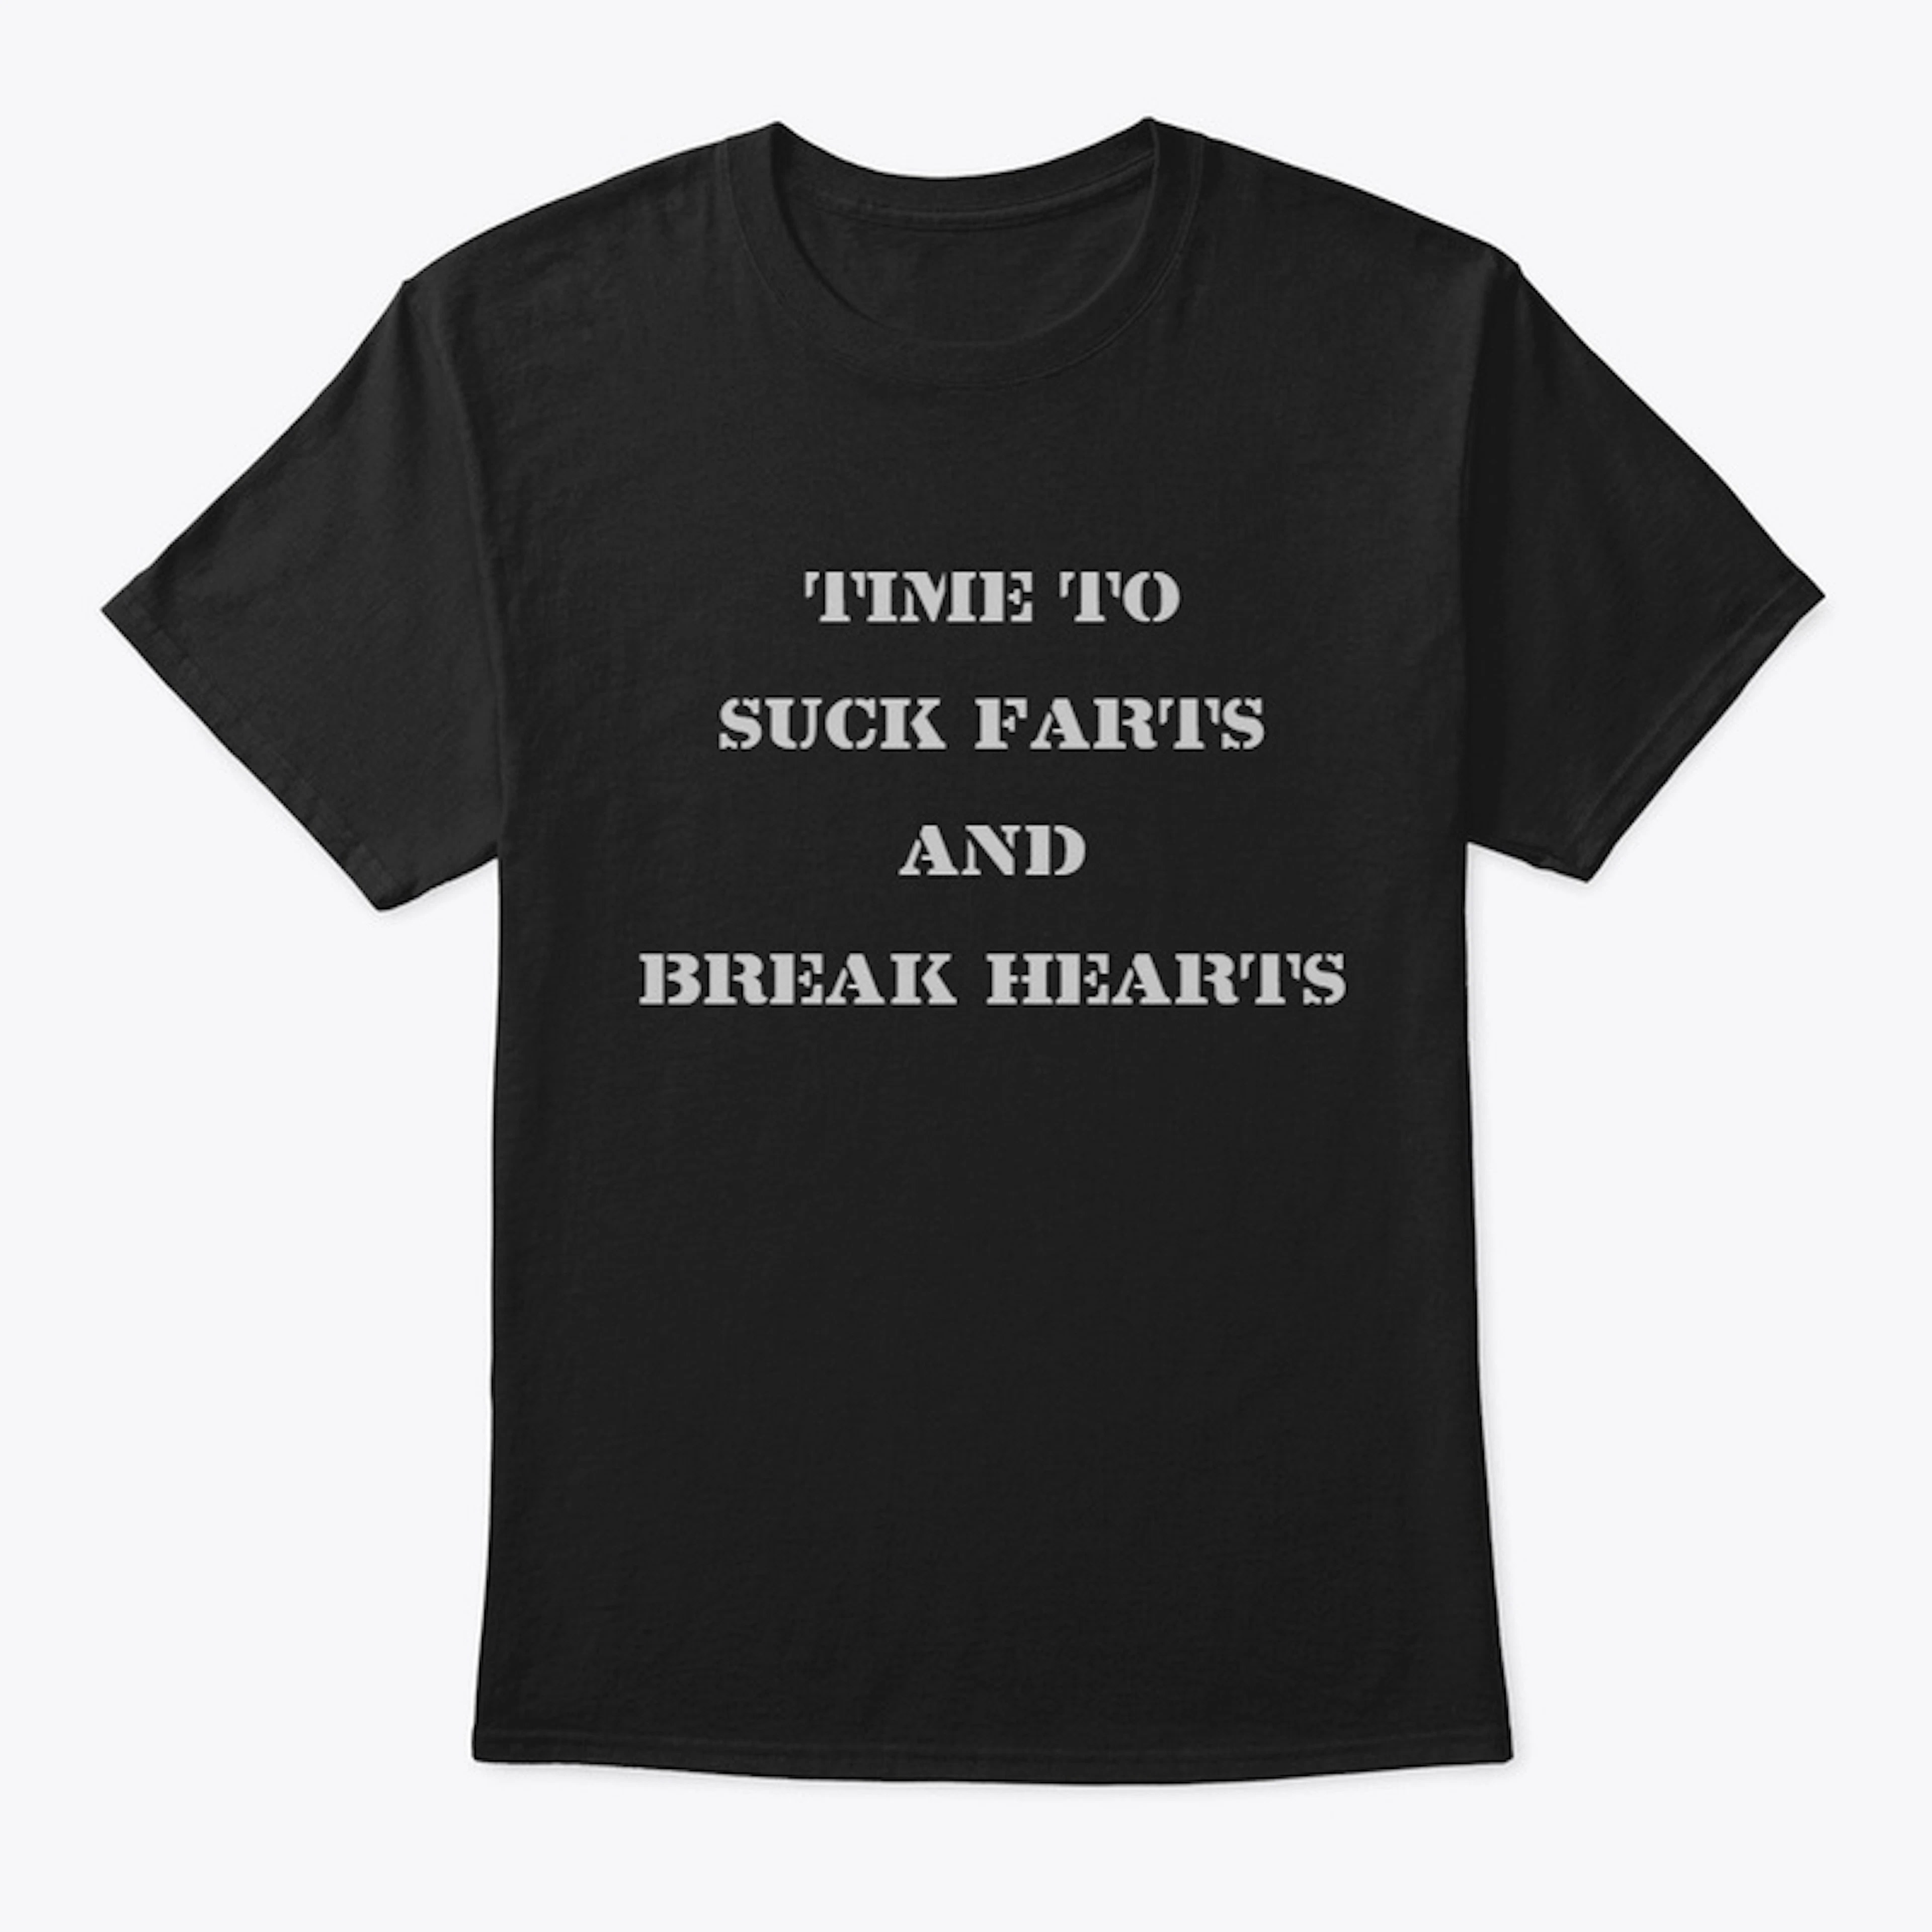 Time to Suck Farts and Break Hearts!